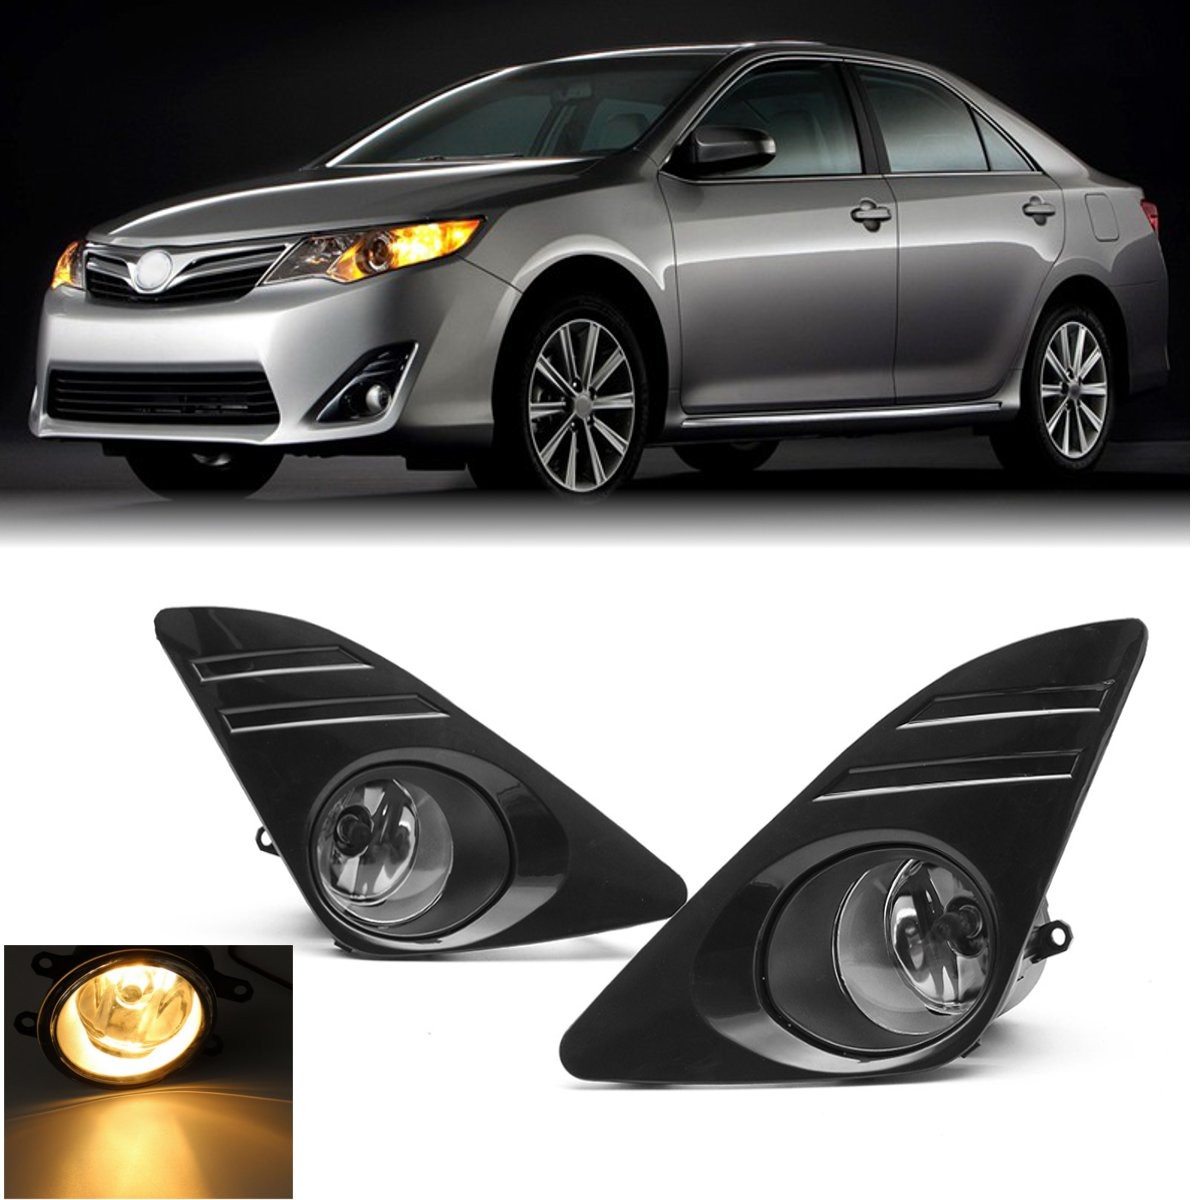 

Car Front Bumper Fog Lights with Covers Wiring Harness Amber Kit for Toyota Camry 2012-2014